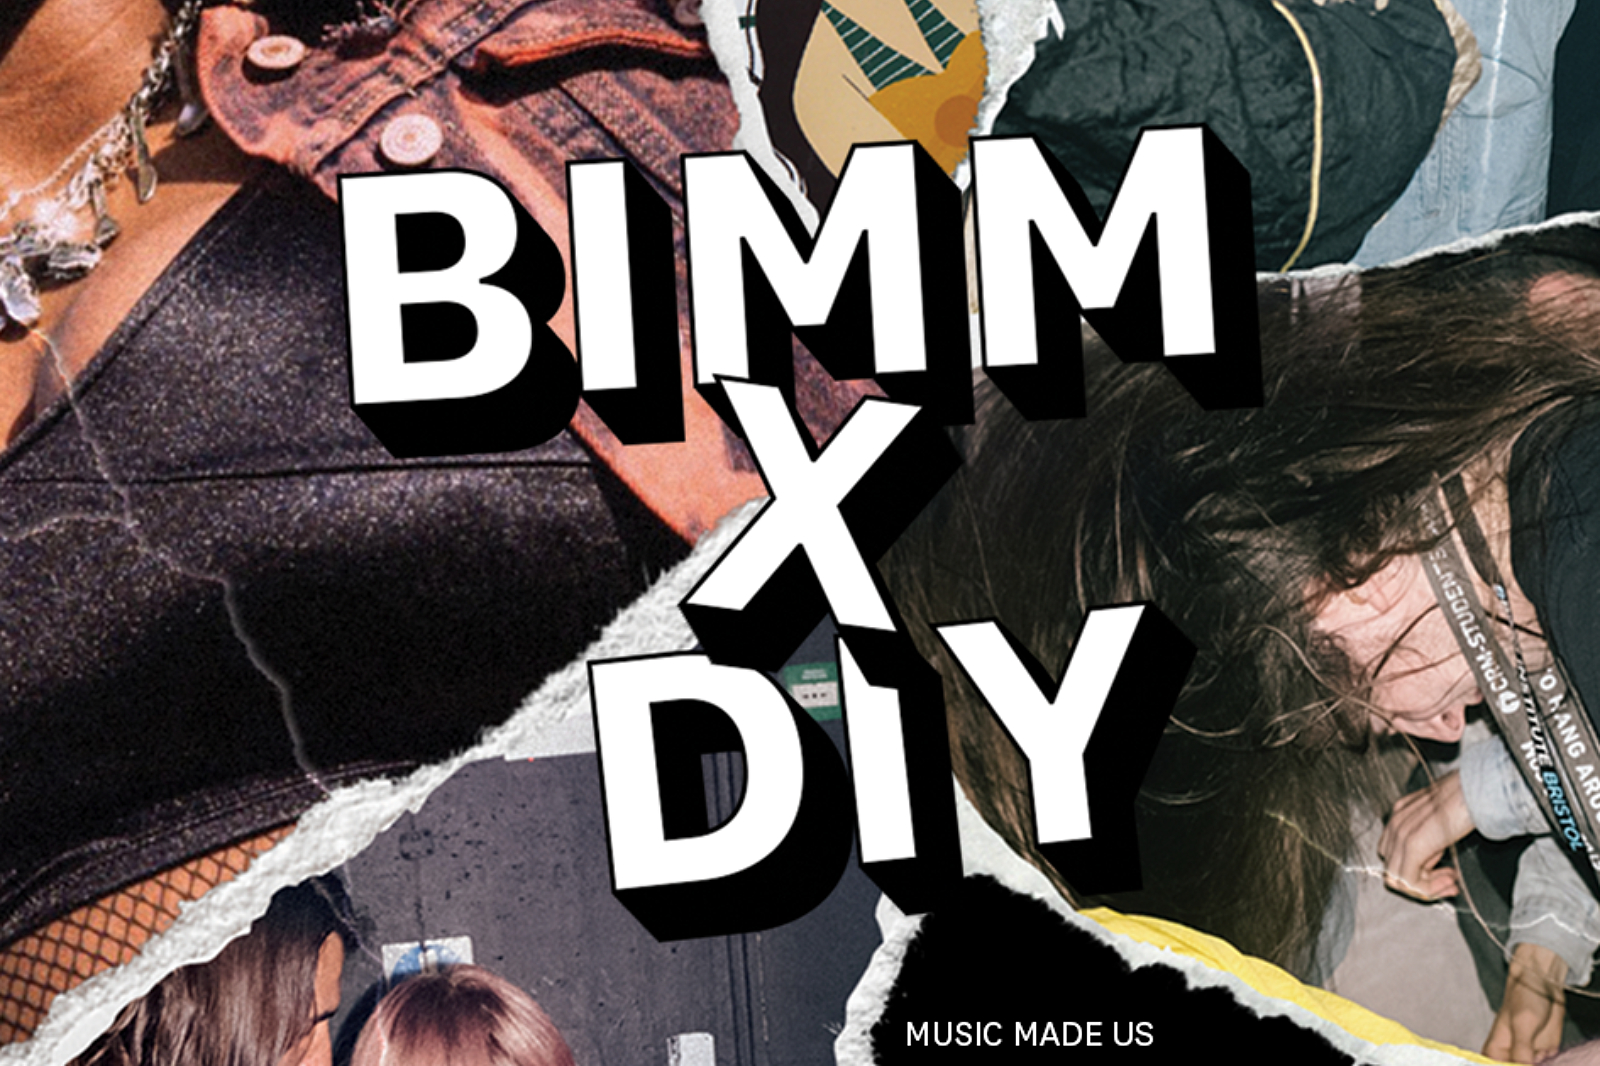 DIY partners with BIMM for student programme to celebrate Music Made Us